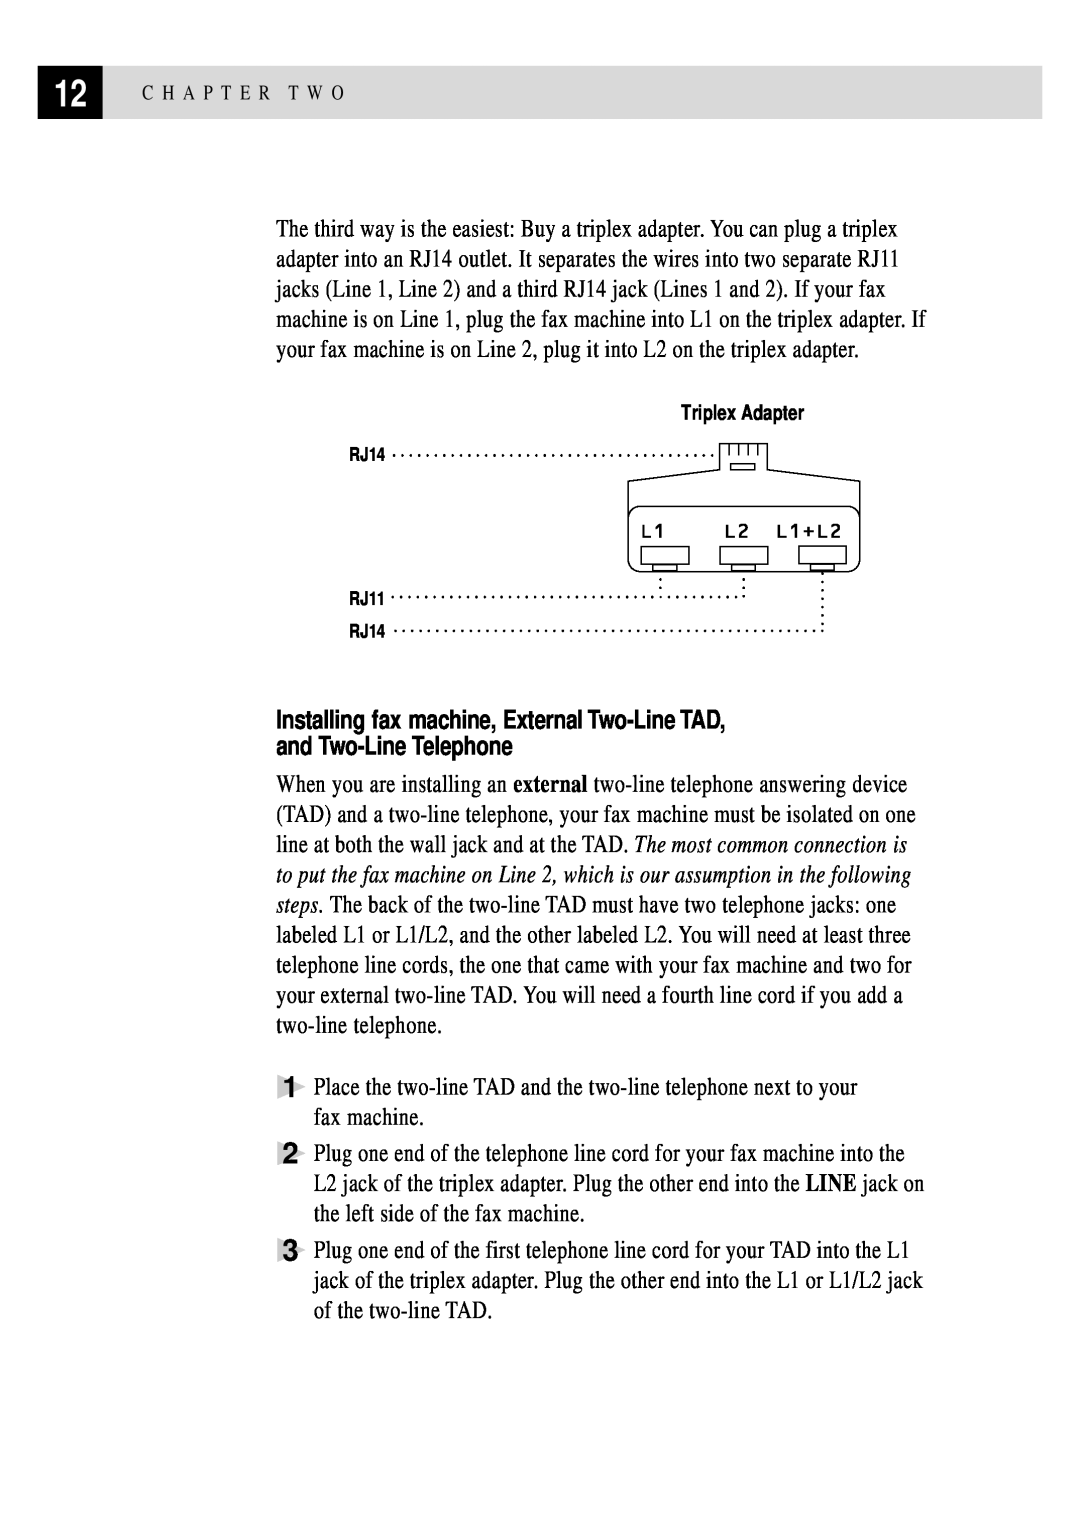 Brother FAX 255 owner manual Installing fax machine, External Two-Line TAD, and Two-Line Telephone, Triplex Adapter 